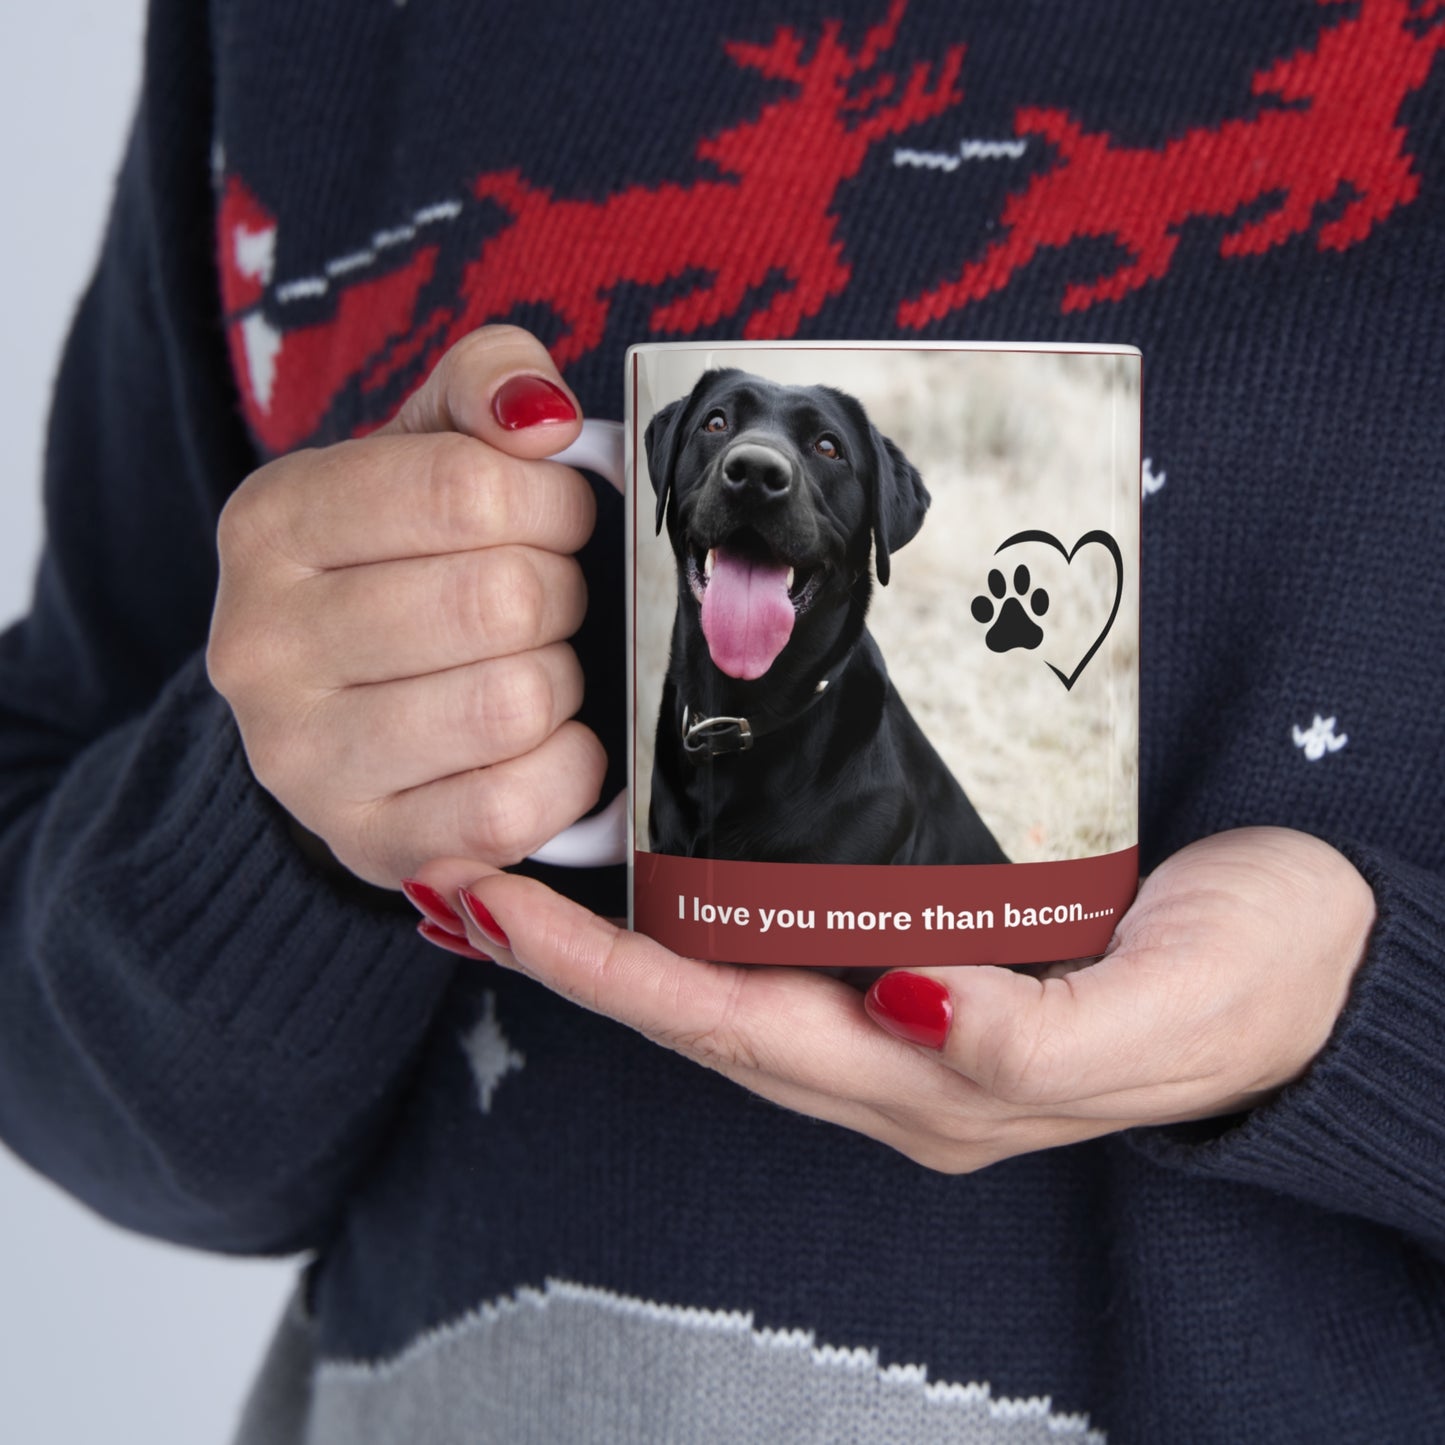 Great coffee mug for the doggie lover who understands they love them more than bacon and how much they look forward to their walks together. Dogs are truly awesome!